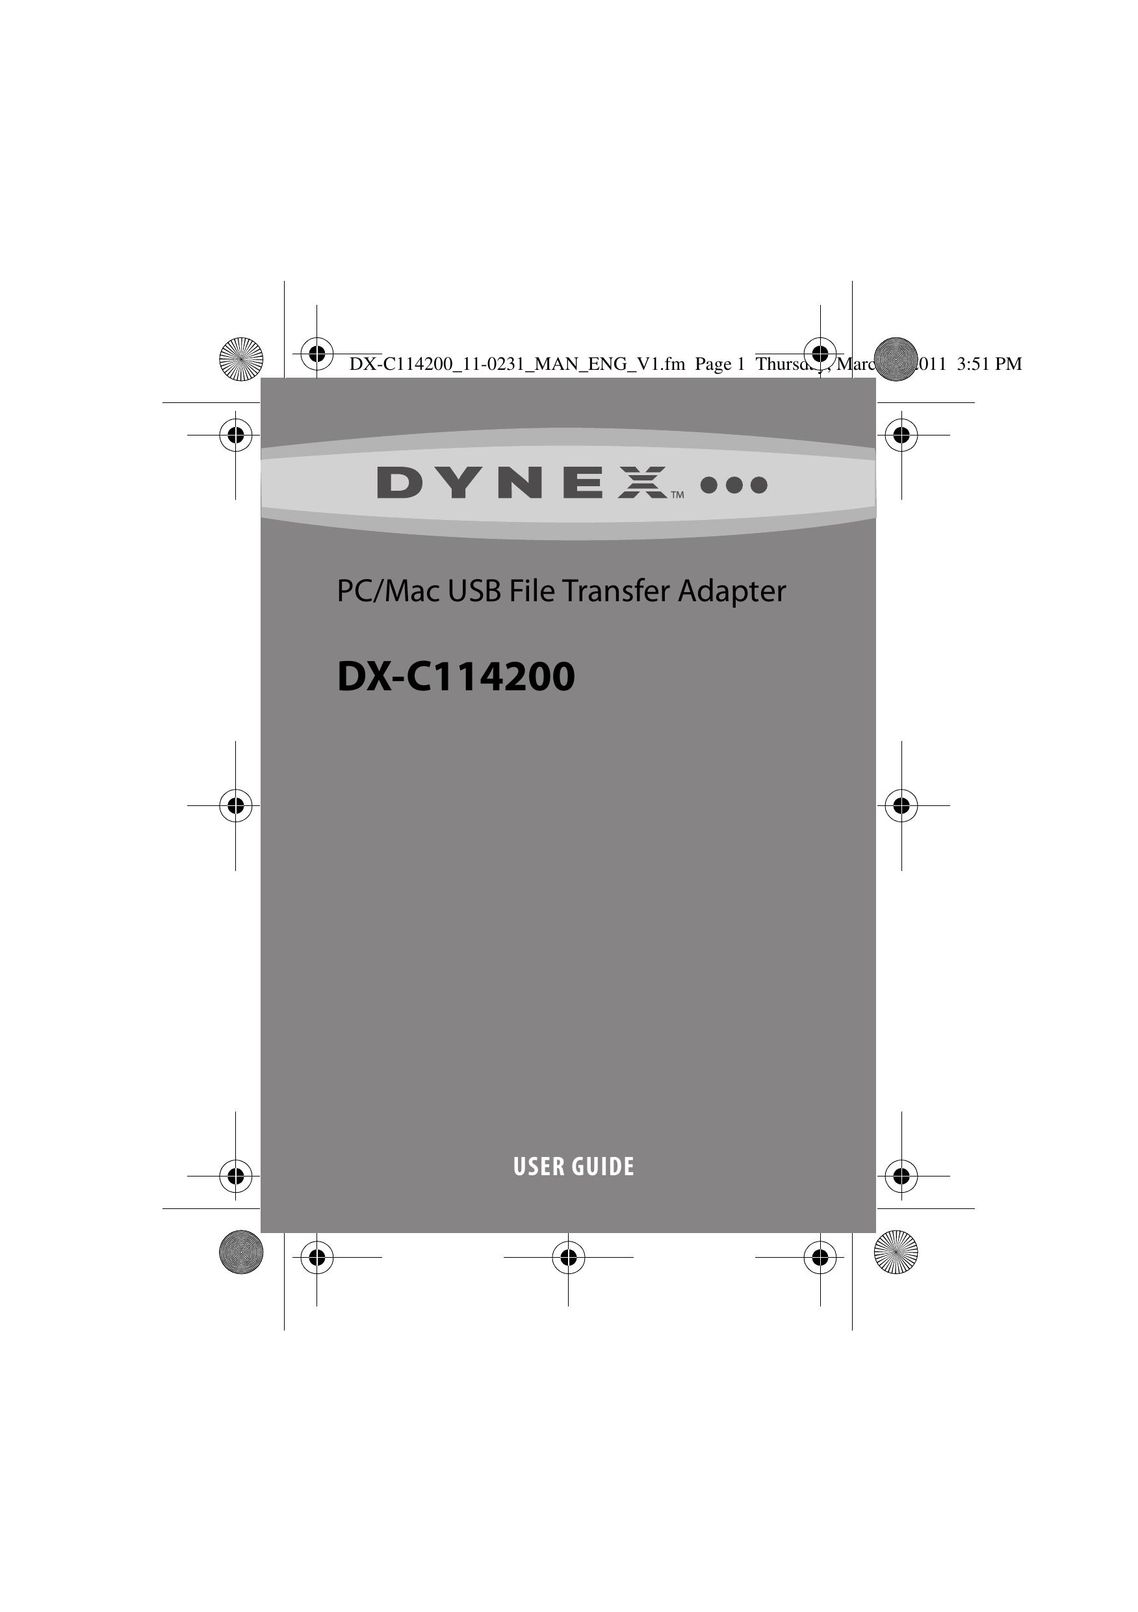 Dynex DX-C114200 Video Gaming Accessories User Manual (Page 1)